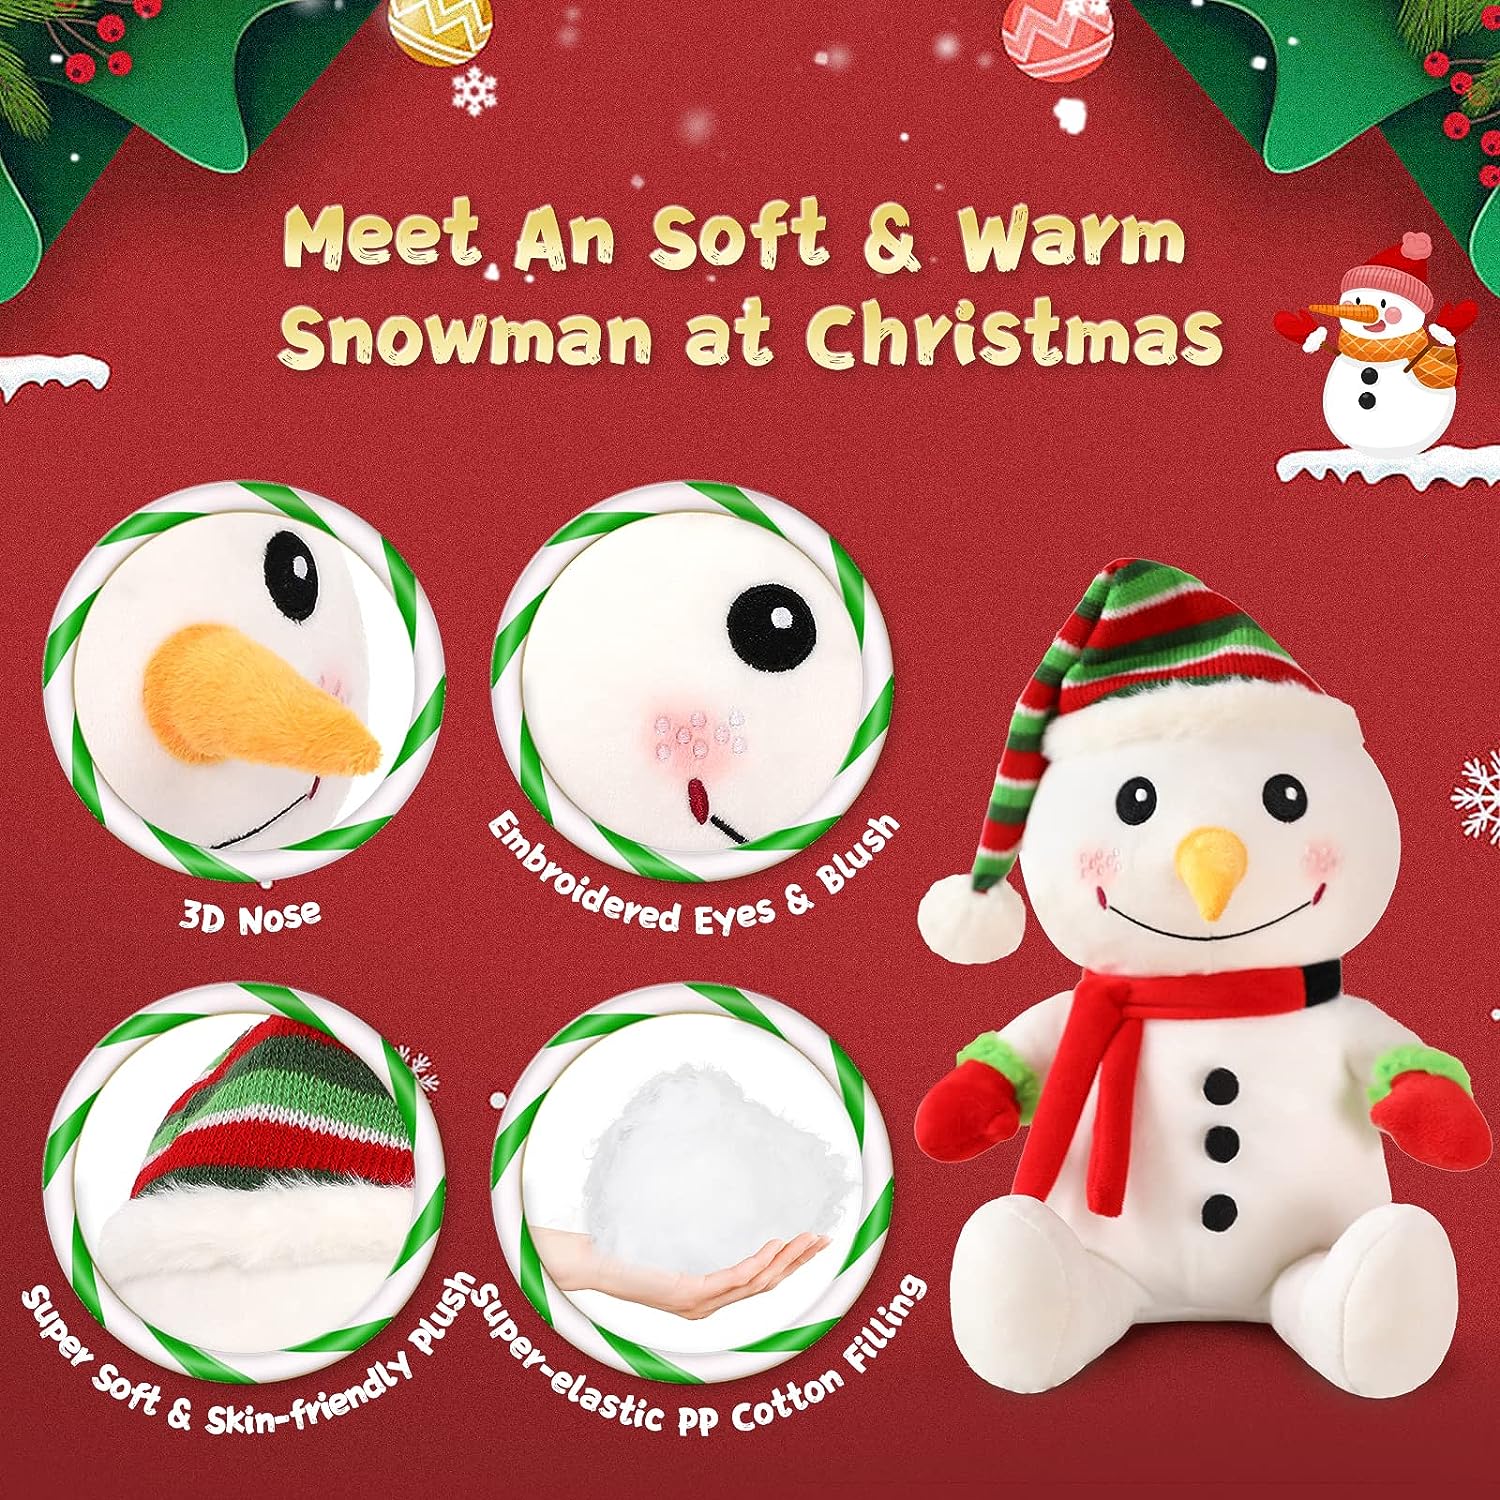 Christmas Snowman Plush Toy, 14.2 Inches